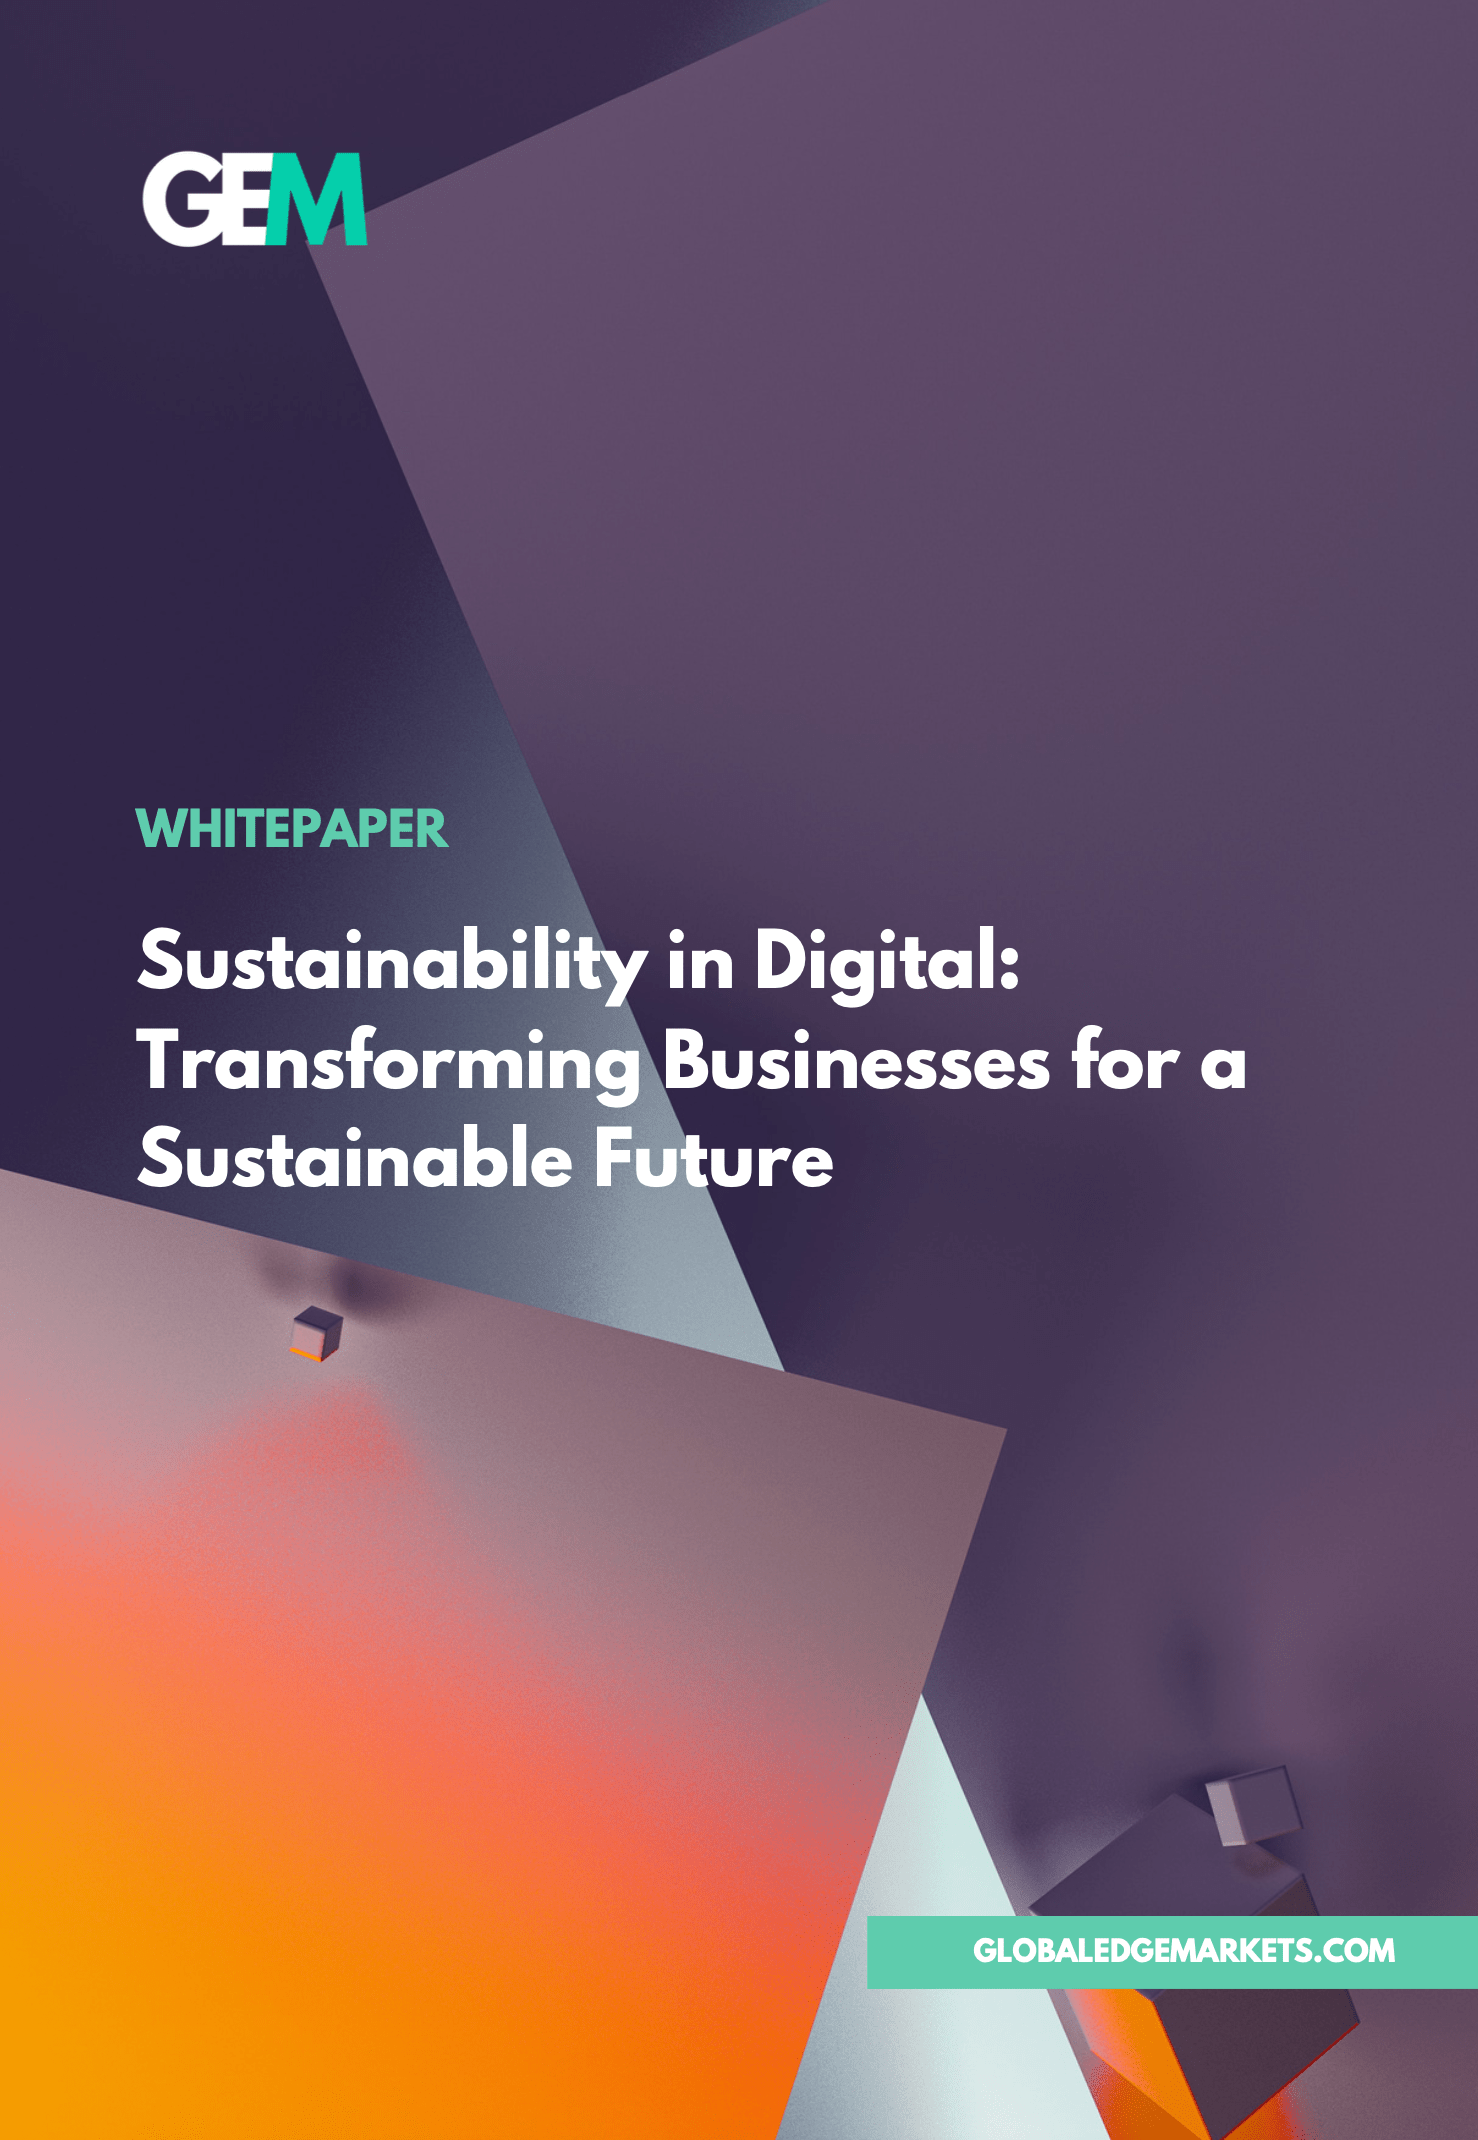 Sustainability in Digital: Transforming Businesses for a Sustainable Future |GlobalEdgeMarkets